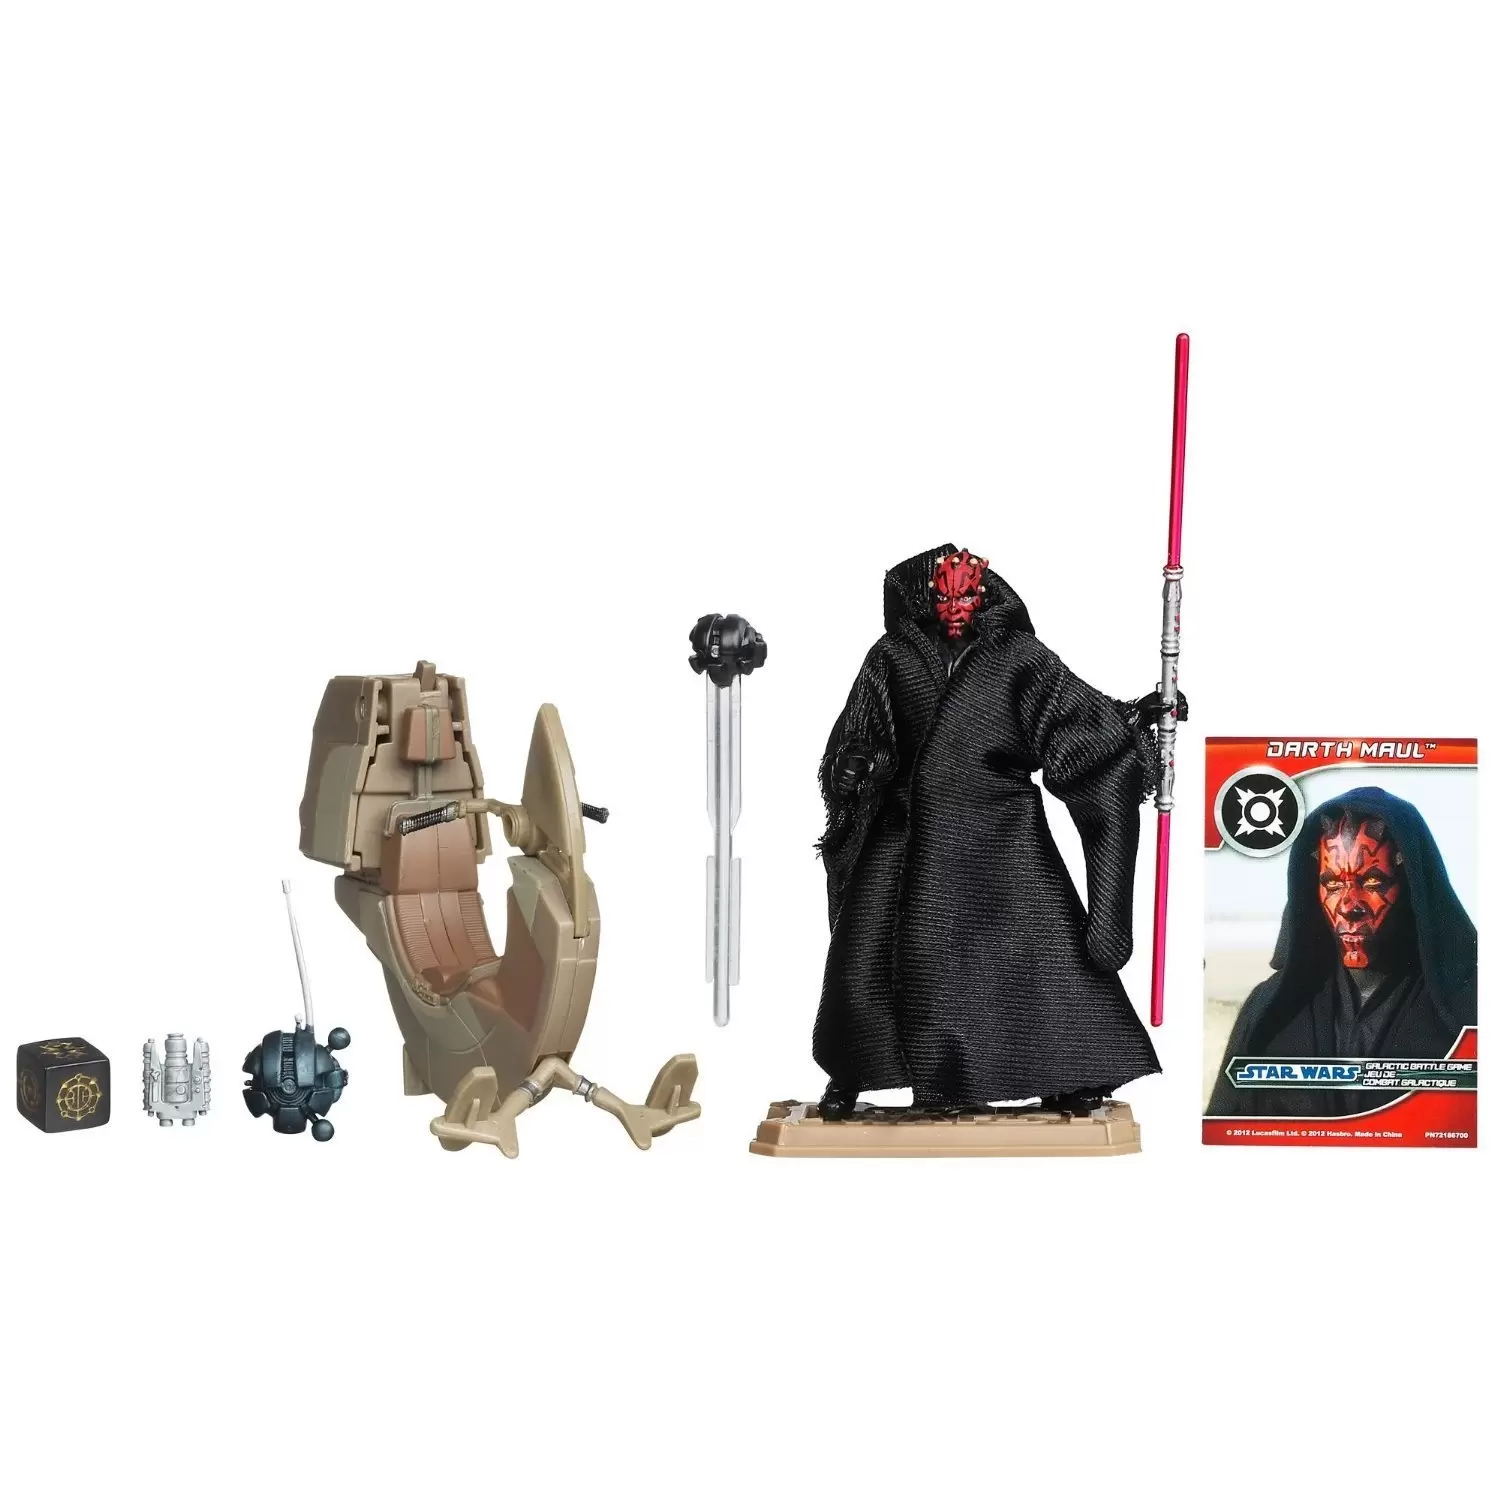 Movie Heroes (Darth Maul Package) - Sith Speeder with Darth Maul